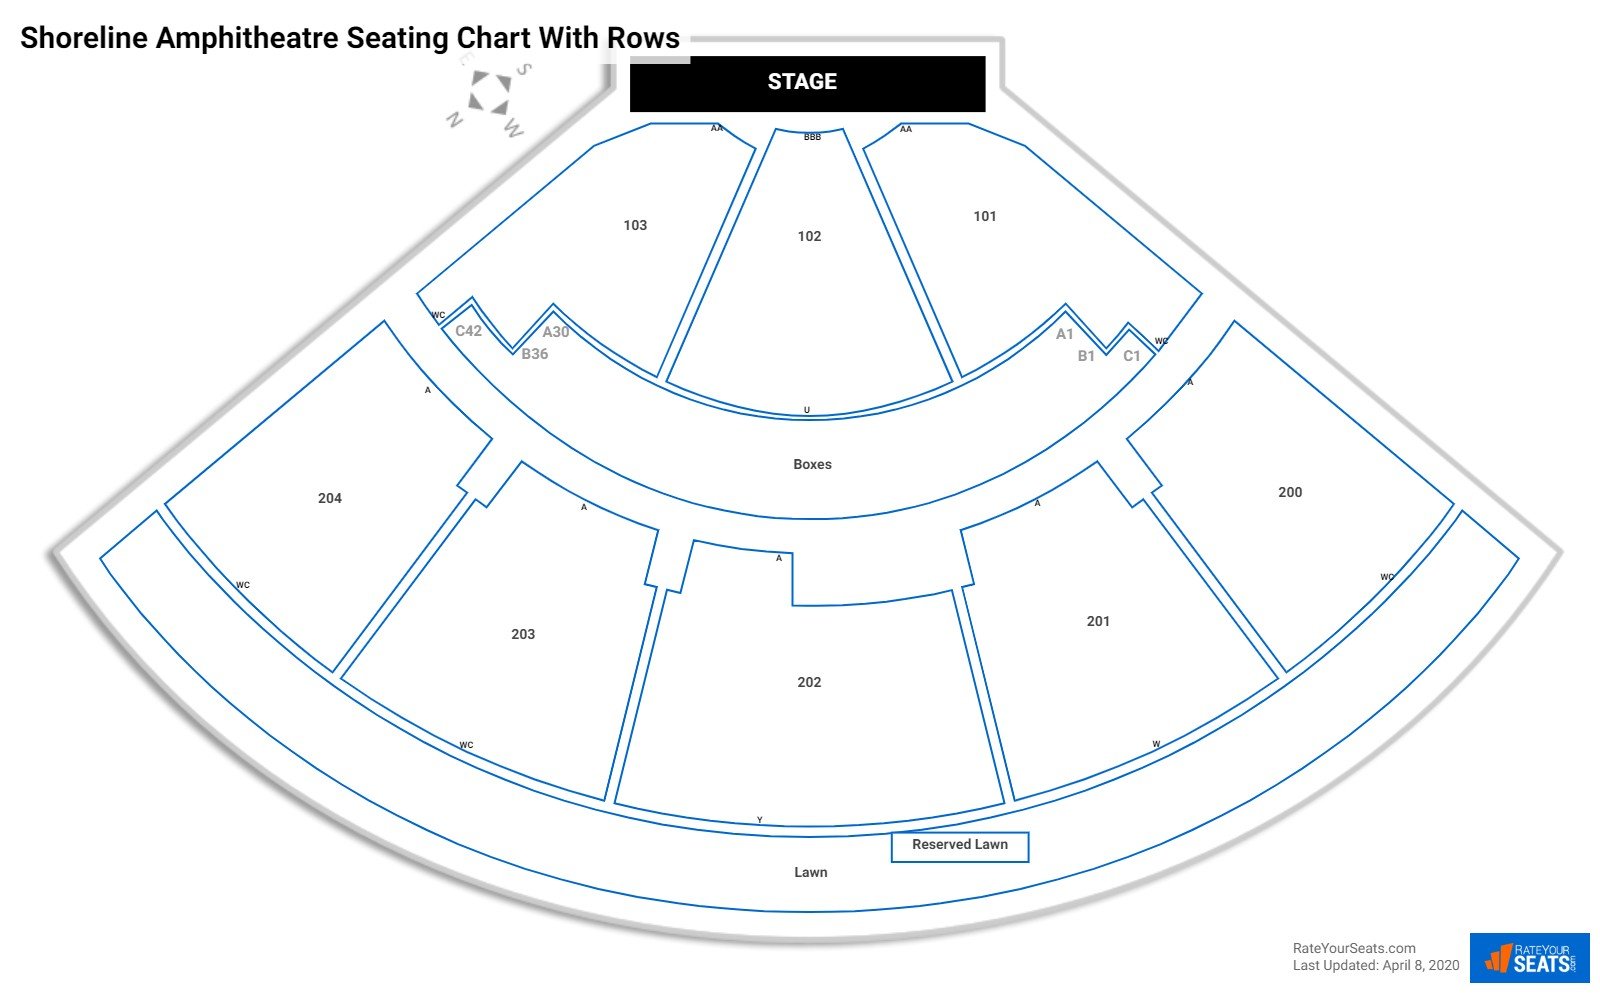 Shoreline Amphitheatre seating chart with row numbers